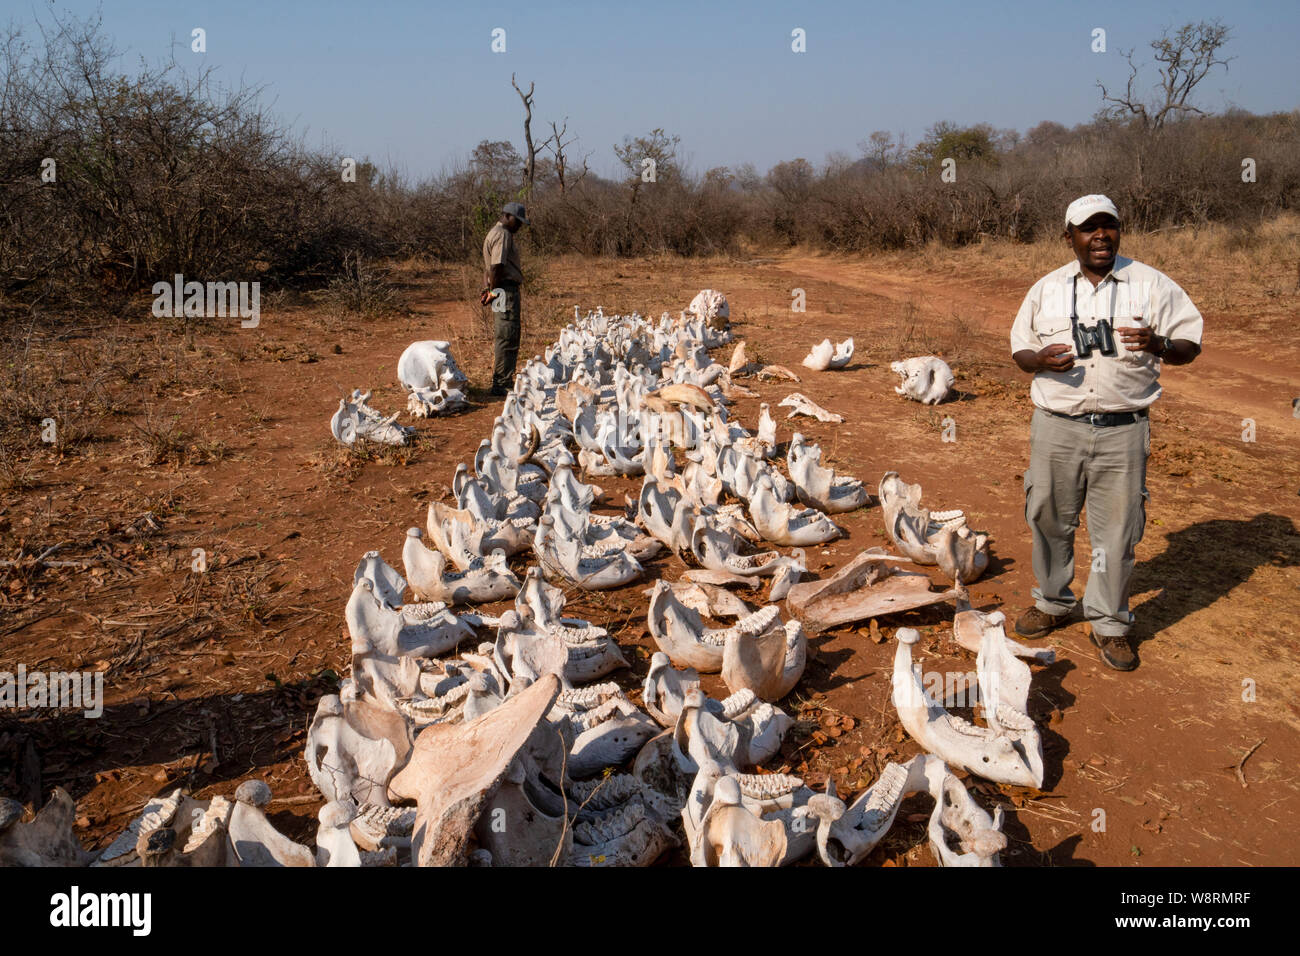 Poached elephant skulls. View of the skulls of elephants which have been killed by poachers for their tusks. Poached elephant tusks are sold for ivory Stock Photo